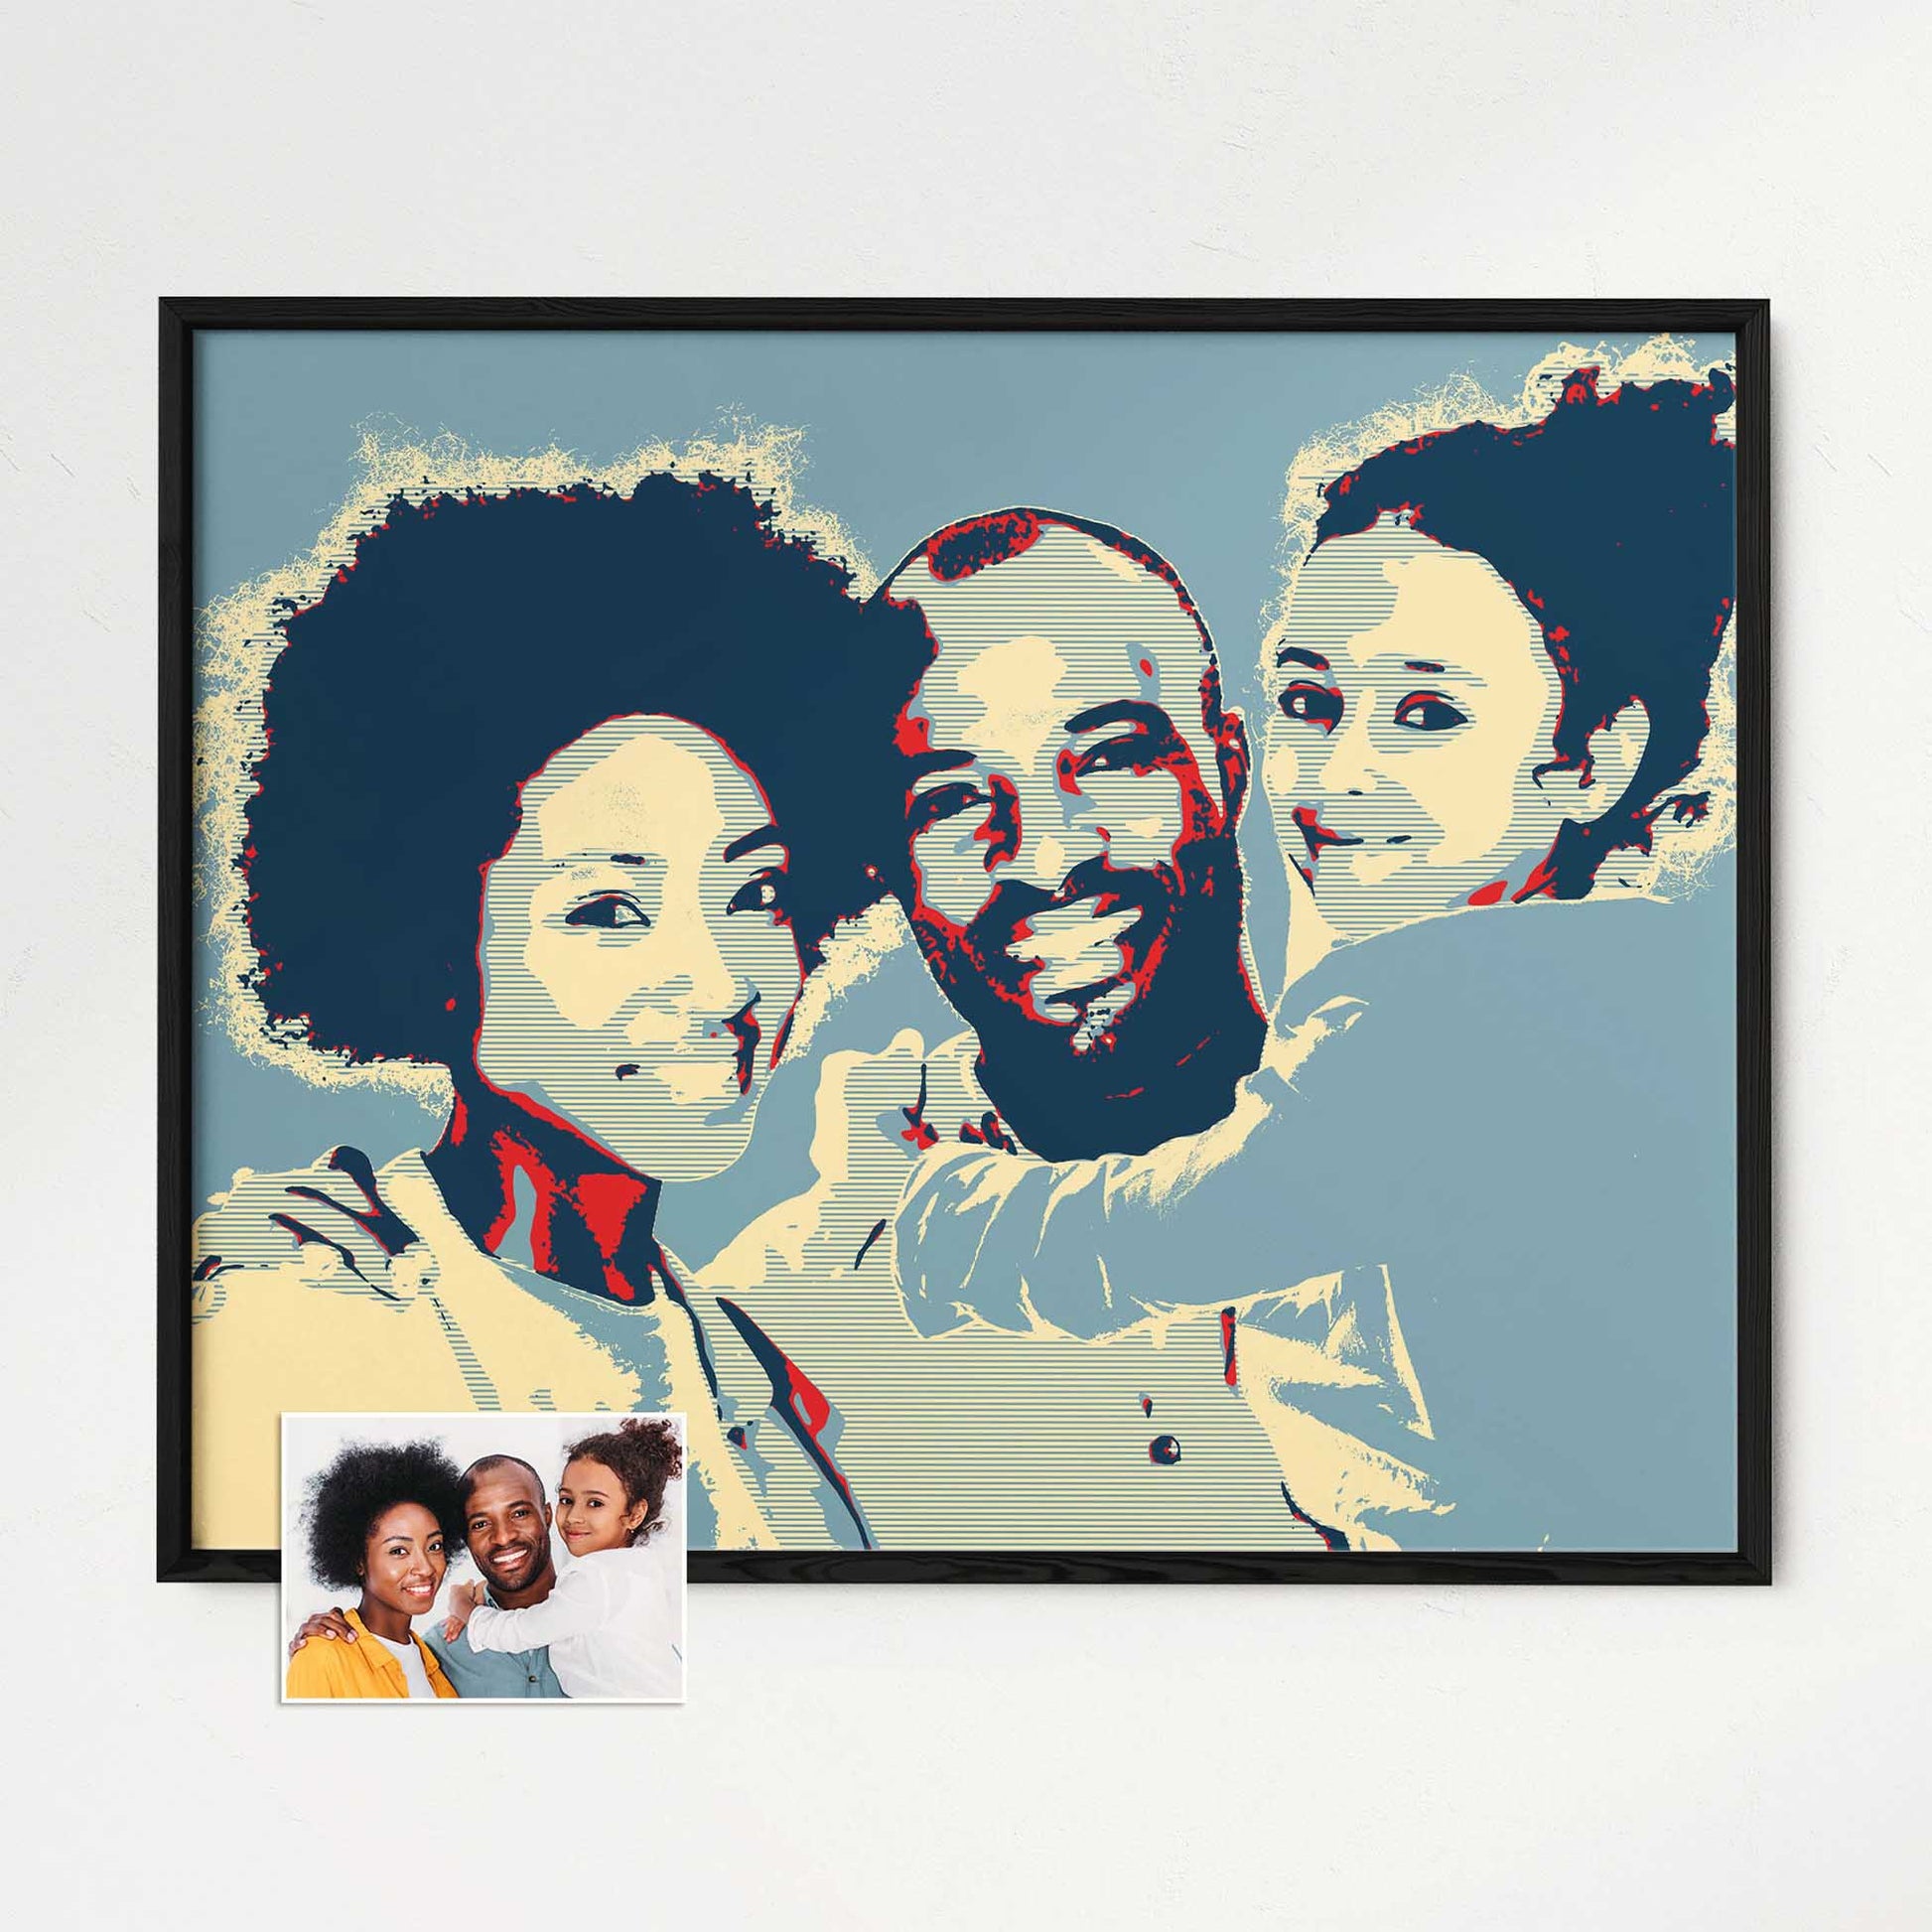 Transform your photo into a stunning Personalised Election Poster Framed Print. The pop art effect adds a unique and creative touch, making it a vibrant and bold piece of visual art. With its gallery-quality wooden frame